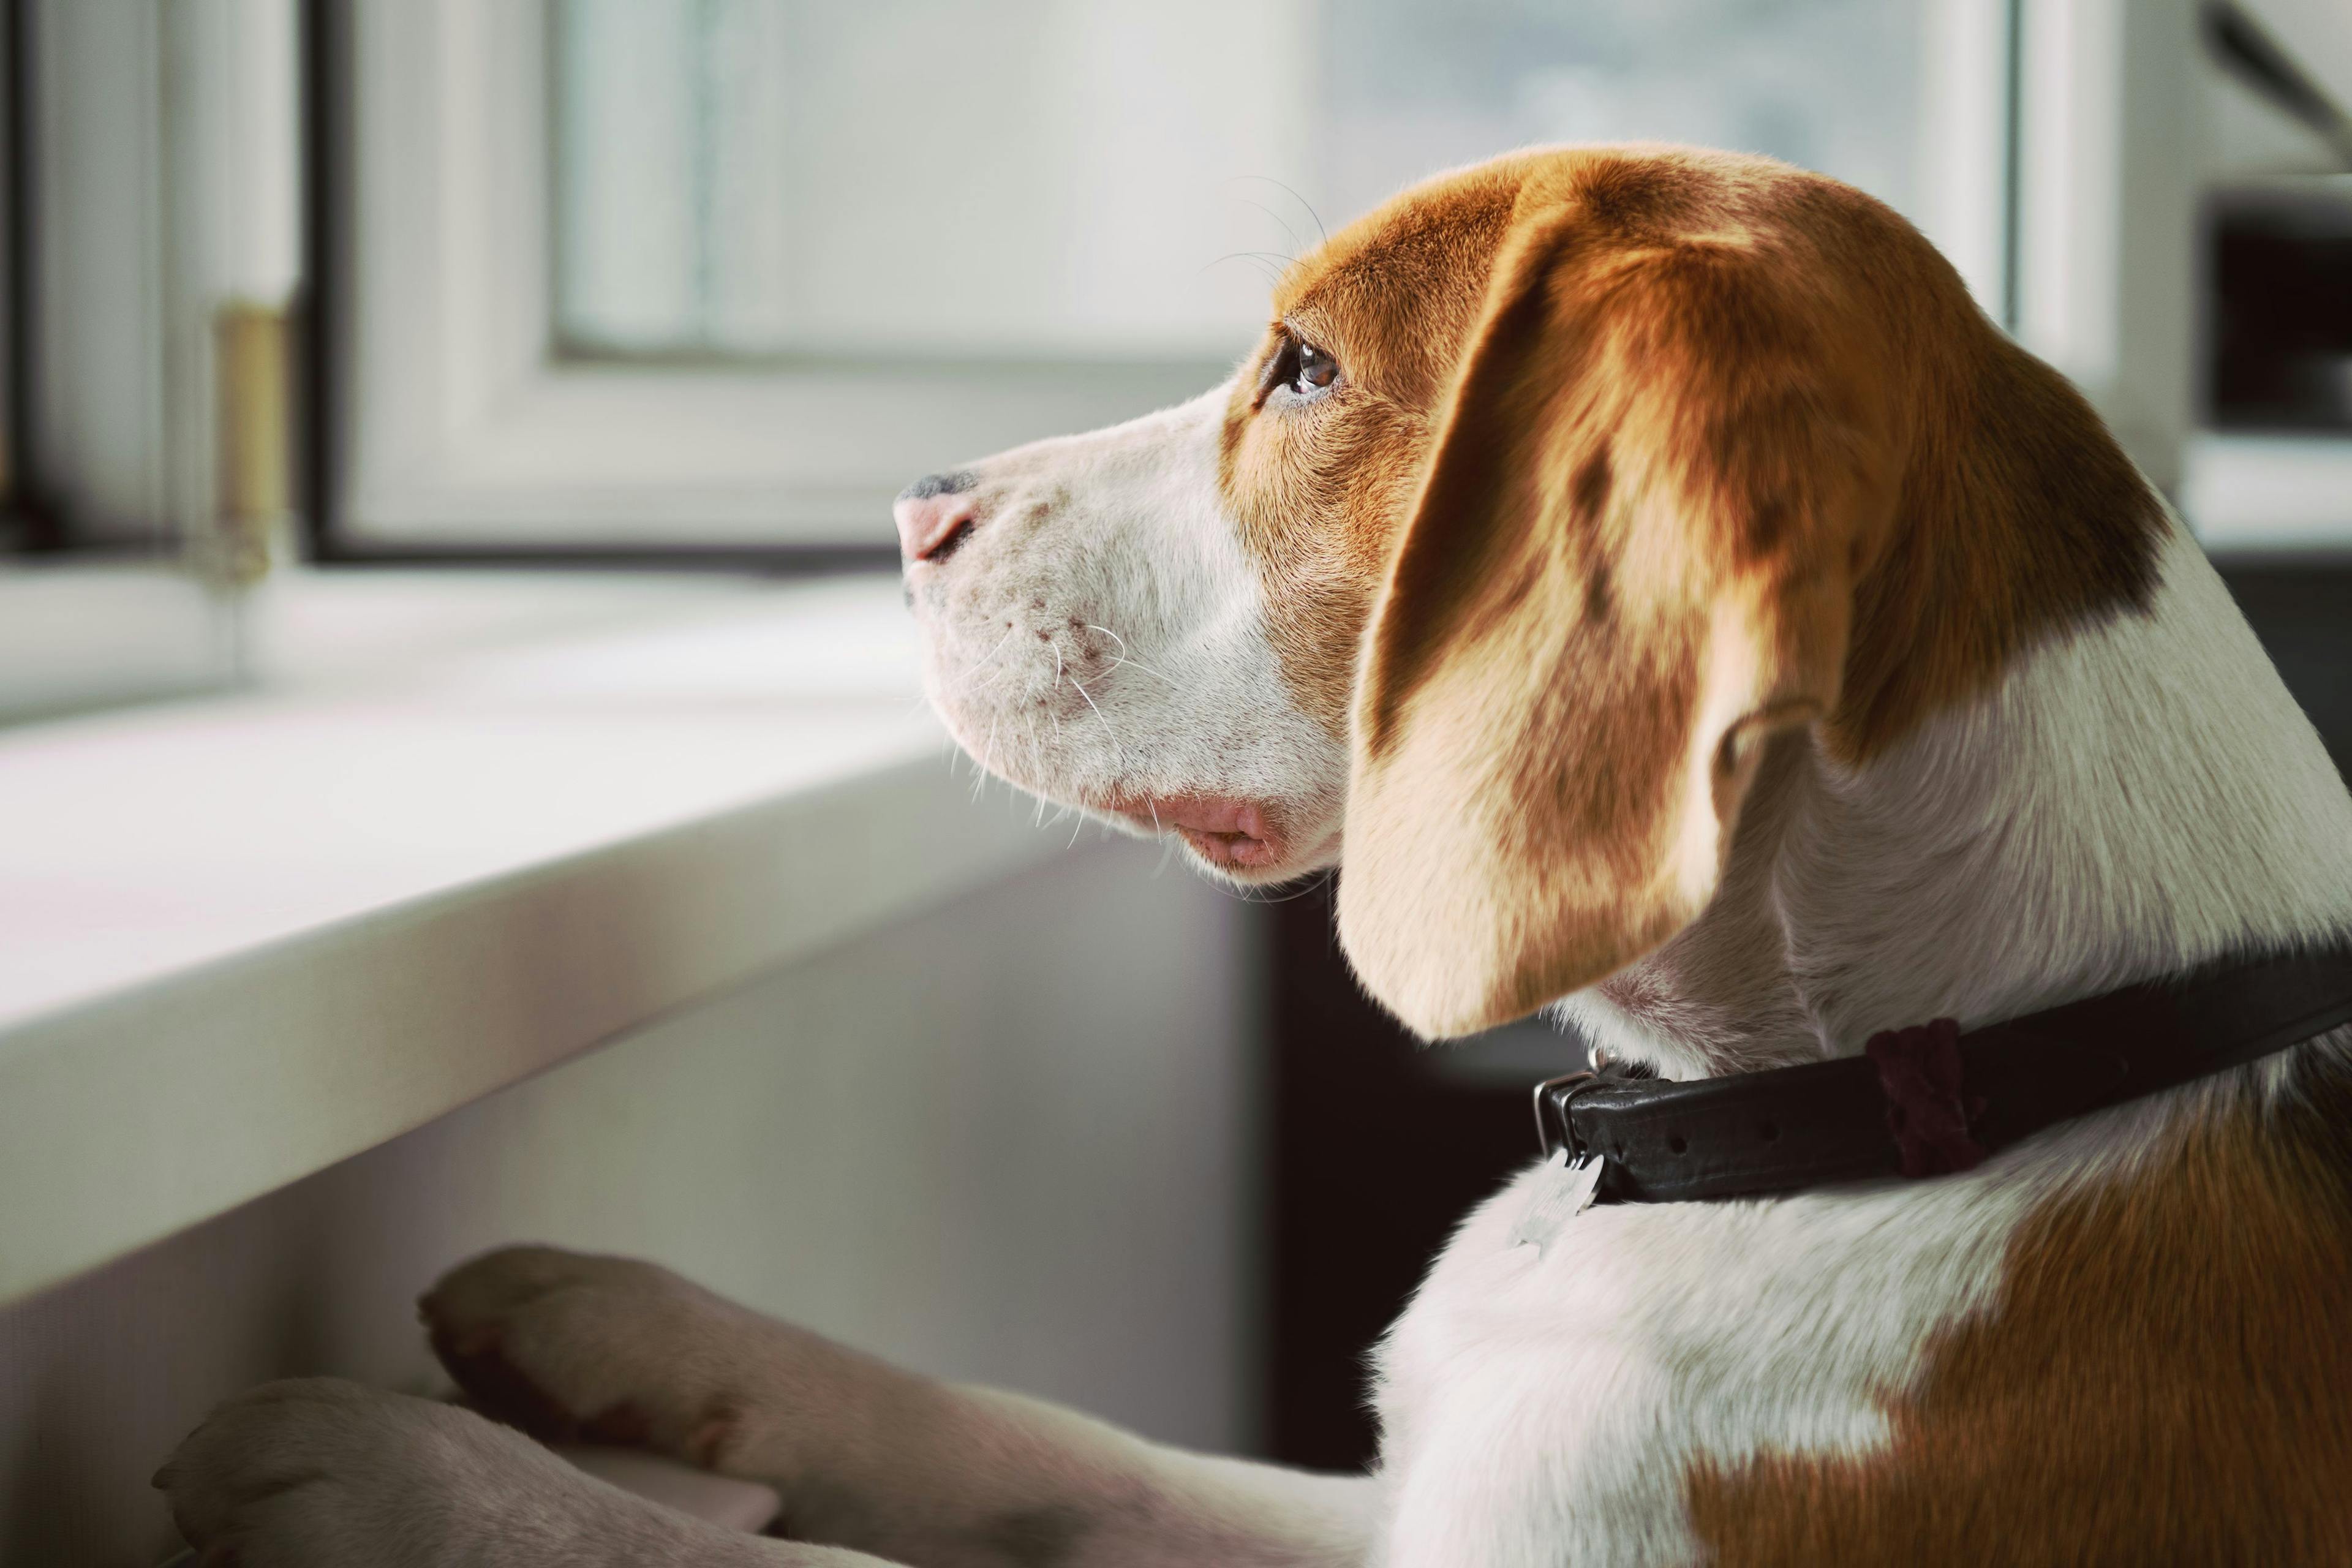 distressed dog looking out window for owner's return